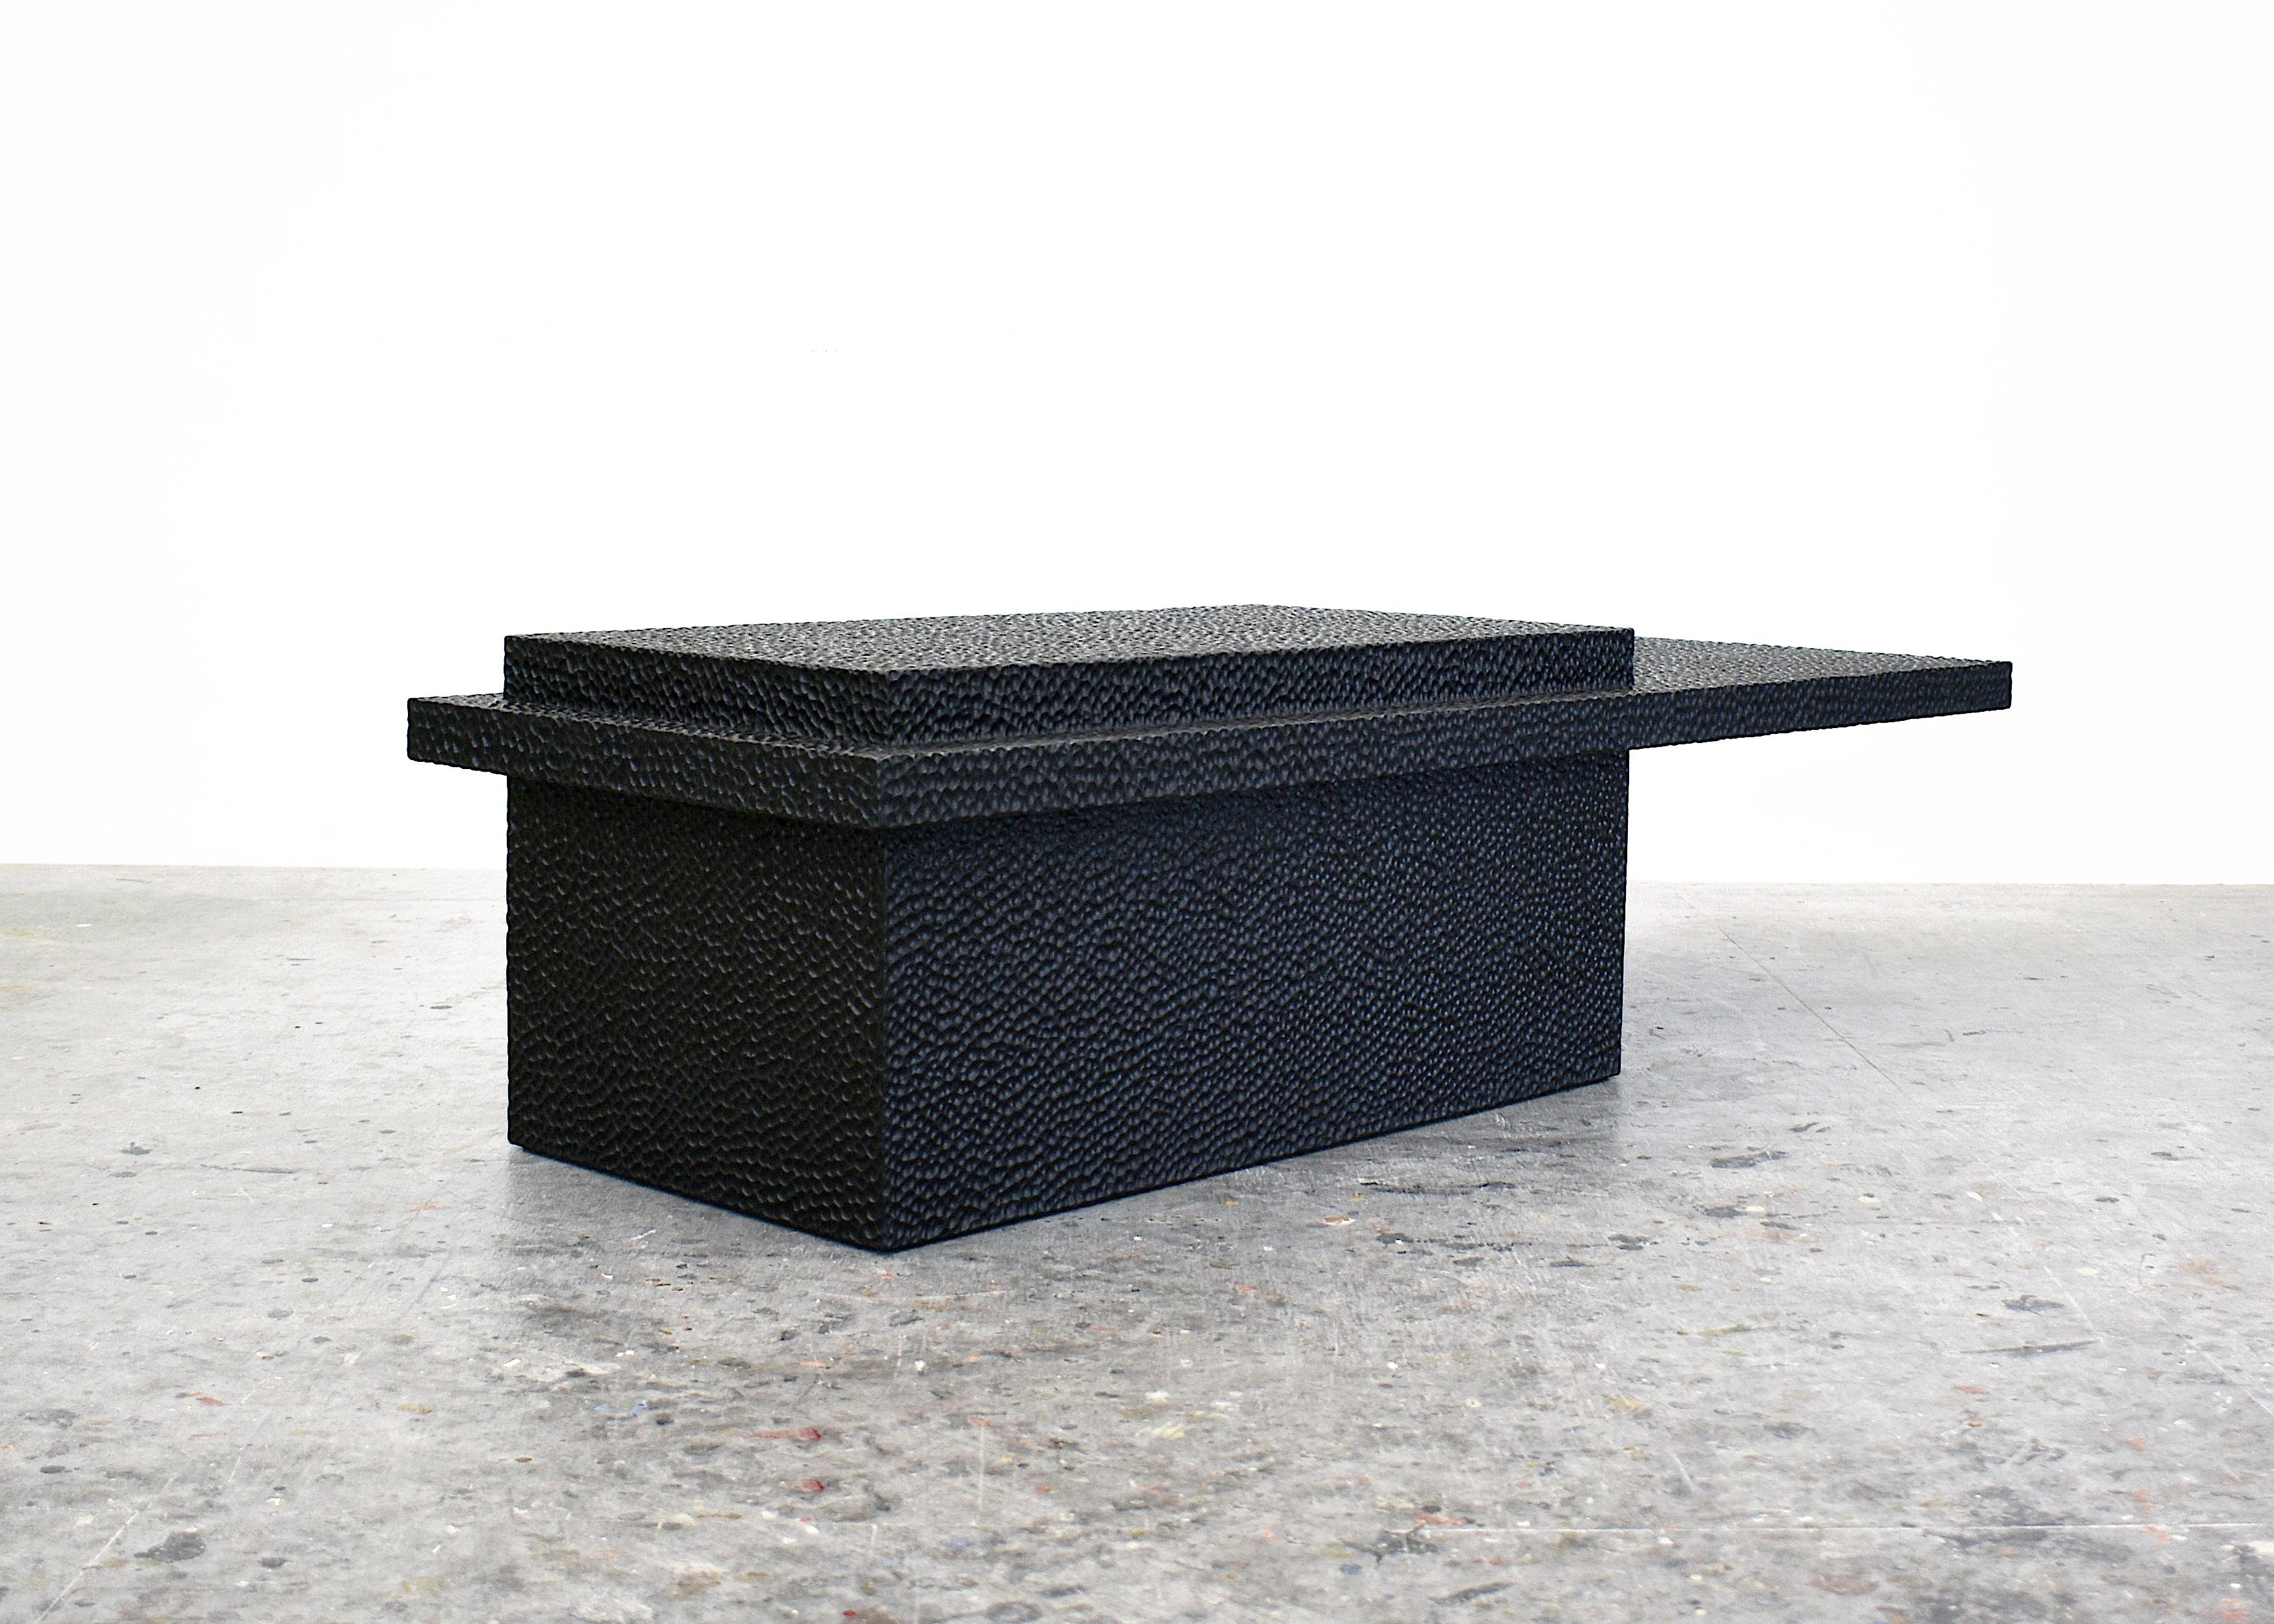 T2 coffee table by John Eric Byers
Dimensions: 35.5 x 155 x 55.9 cm
Materials: carved blackened Maple

All works are individually handmade to order.

John Eric Byers creates geometrically inspired pieces that are minimal, emotional, and